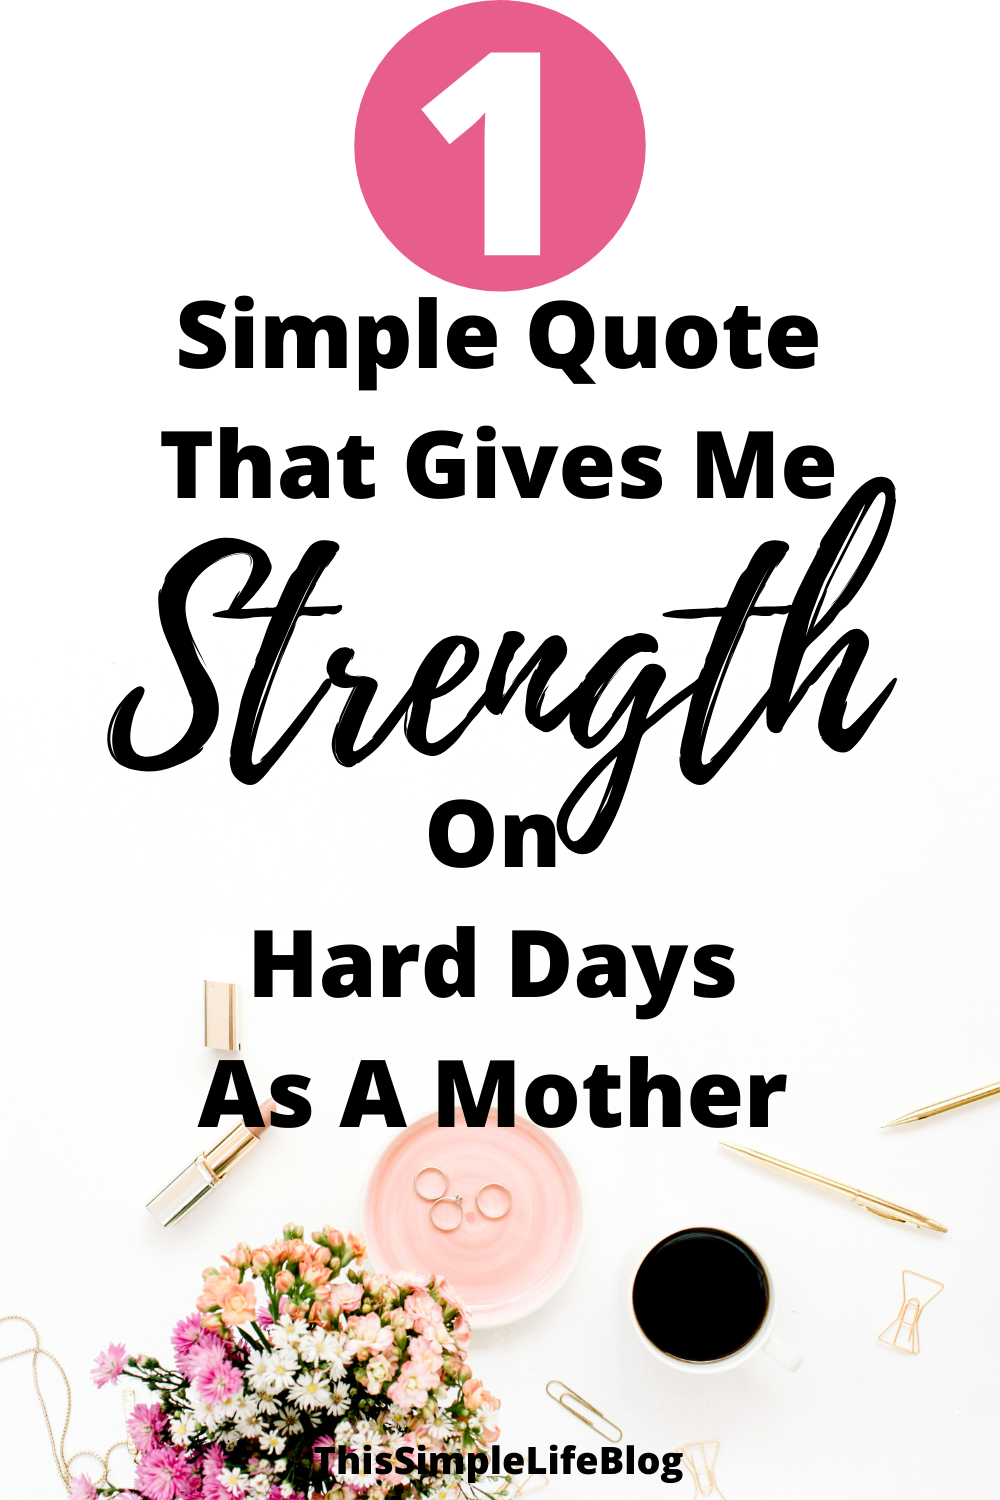 One tip to give mothers strength on their hardest days as a mom